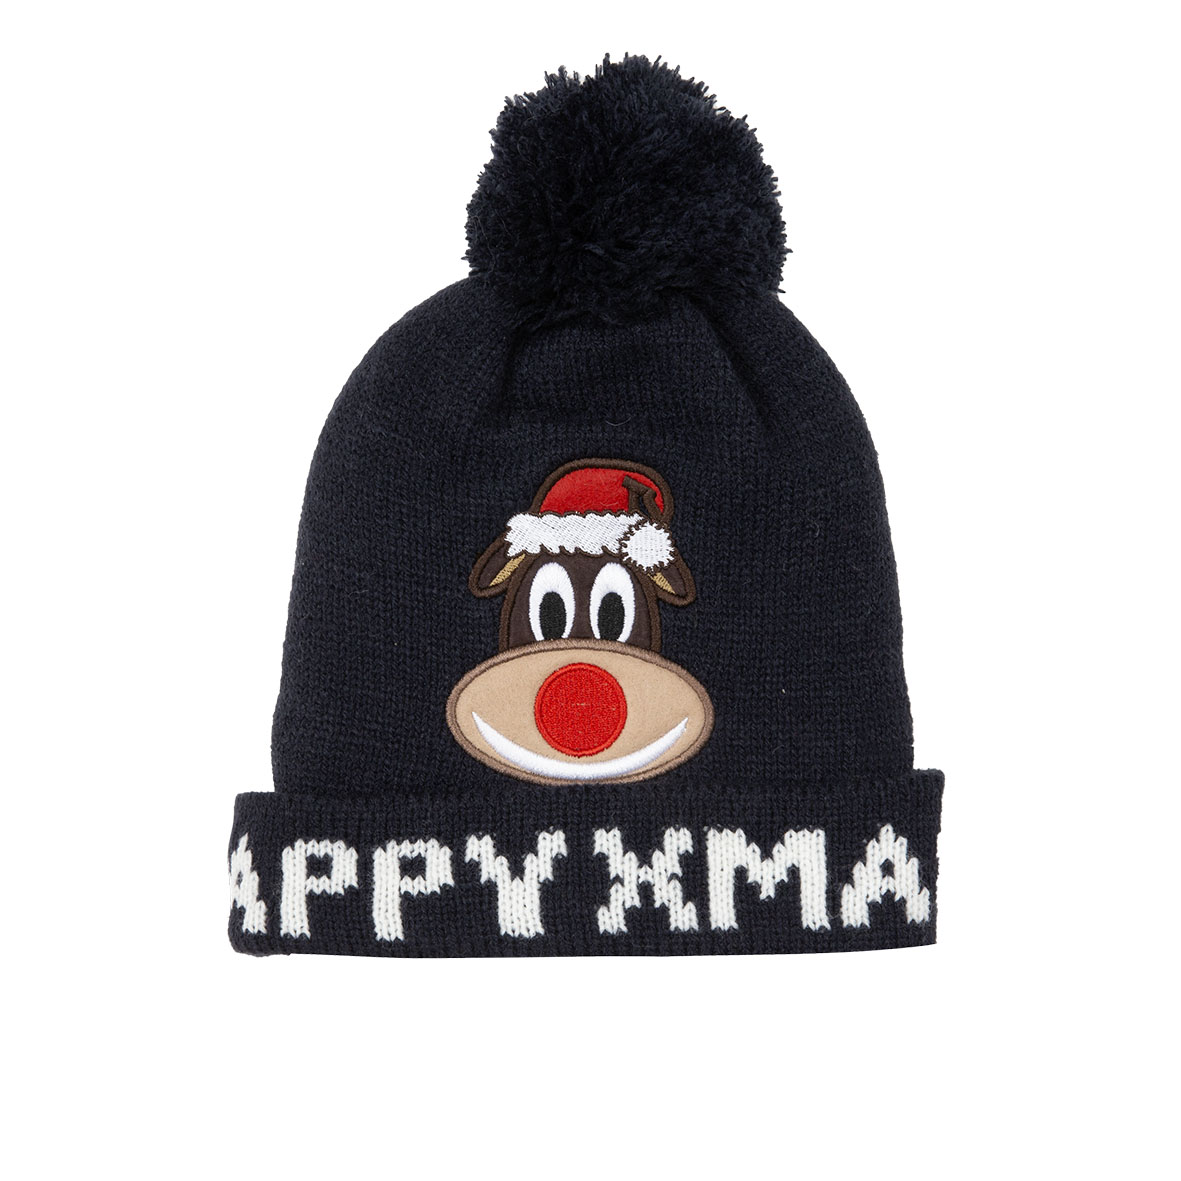 Mawi cappello tricot natale baby boy - Mawi